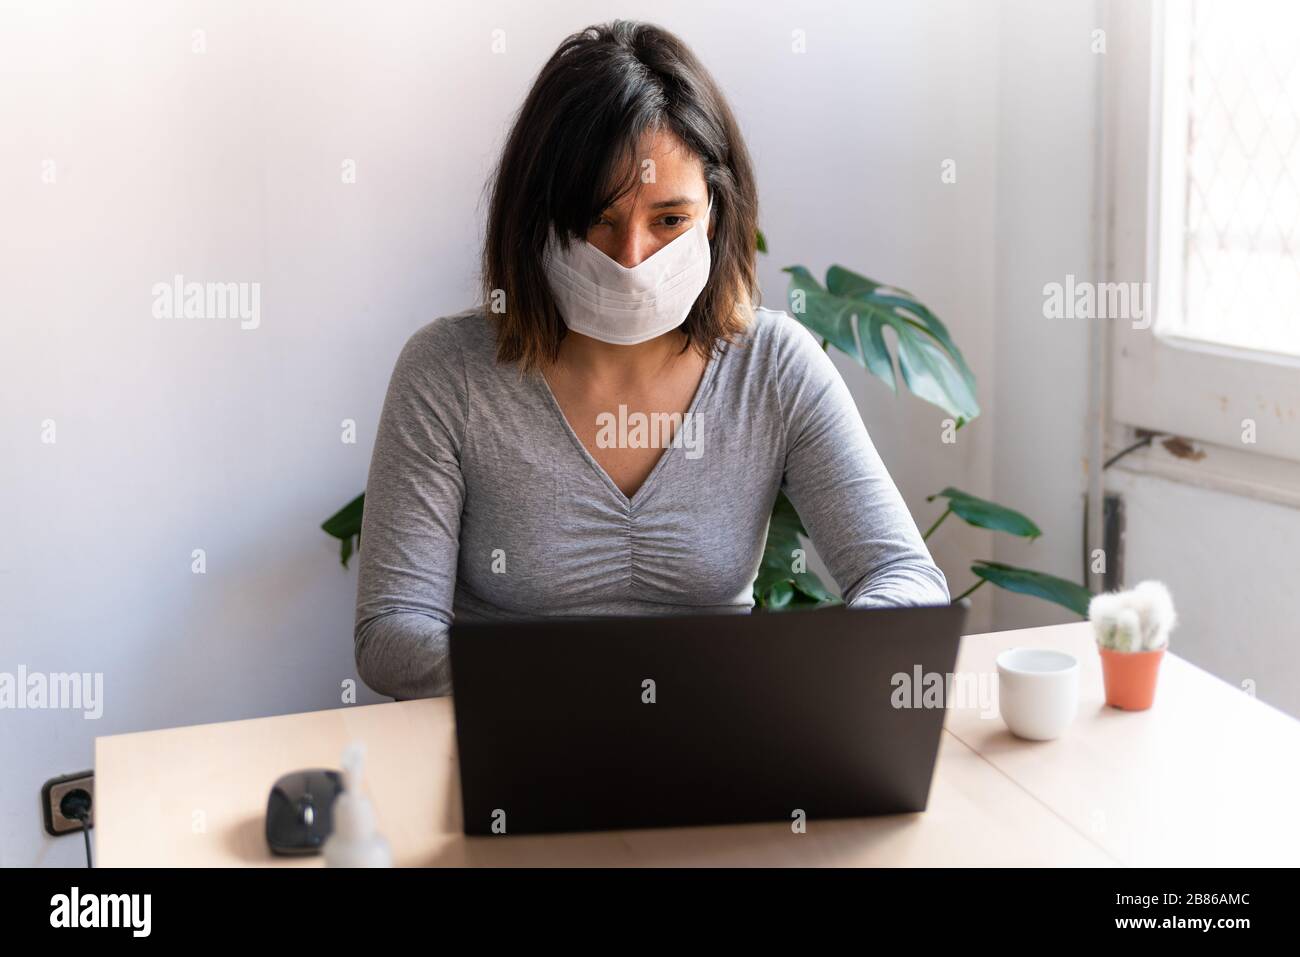 young woman wearing protective face mask and with hand sanitizer work from home office due to corona virus outbreak, quarantine is a measure take to s Stock Photo